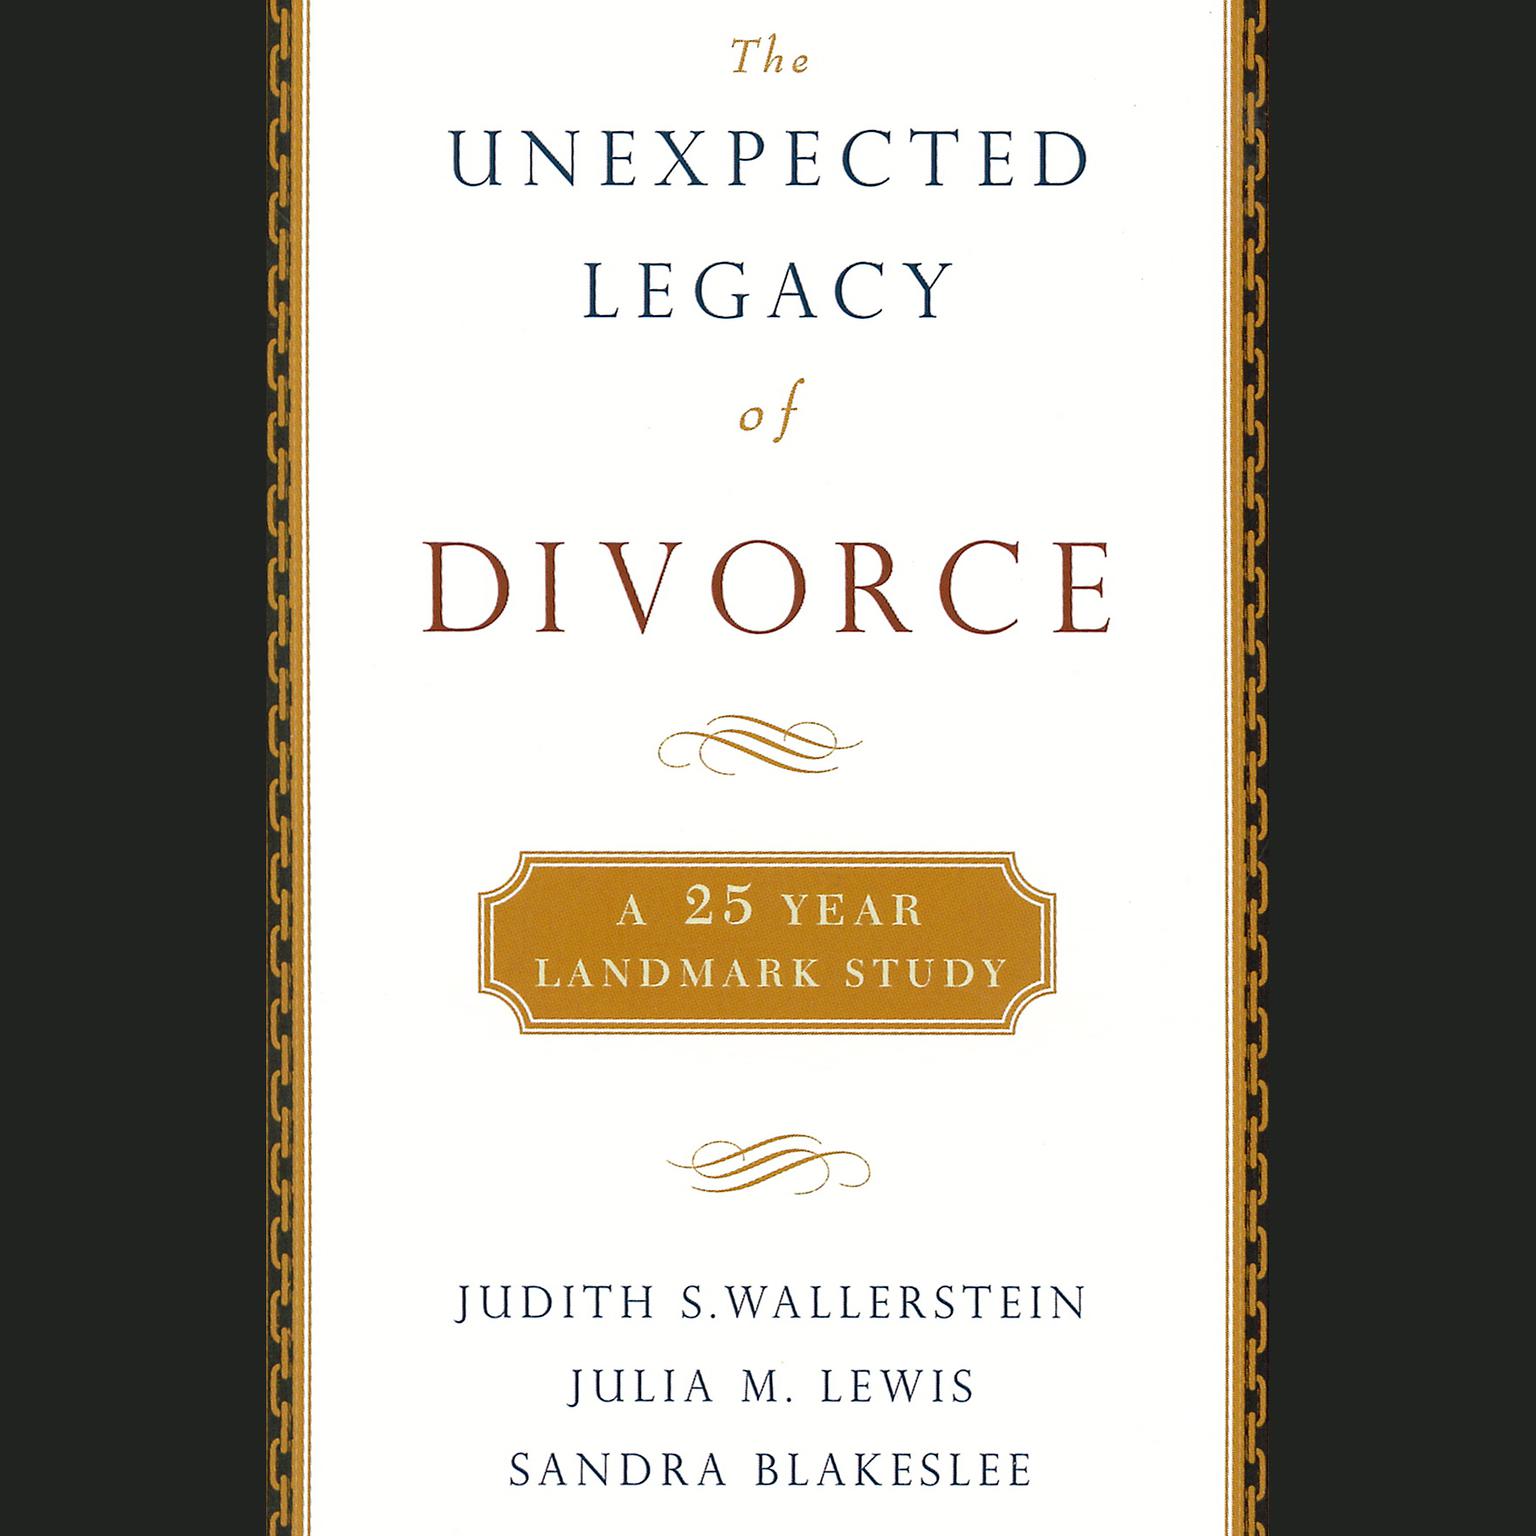 The Unexpected Legacy of Divorce (Abridged): A 25-Year Landmark Study Audiobook, by Judith S. Wallerstein